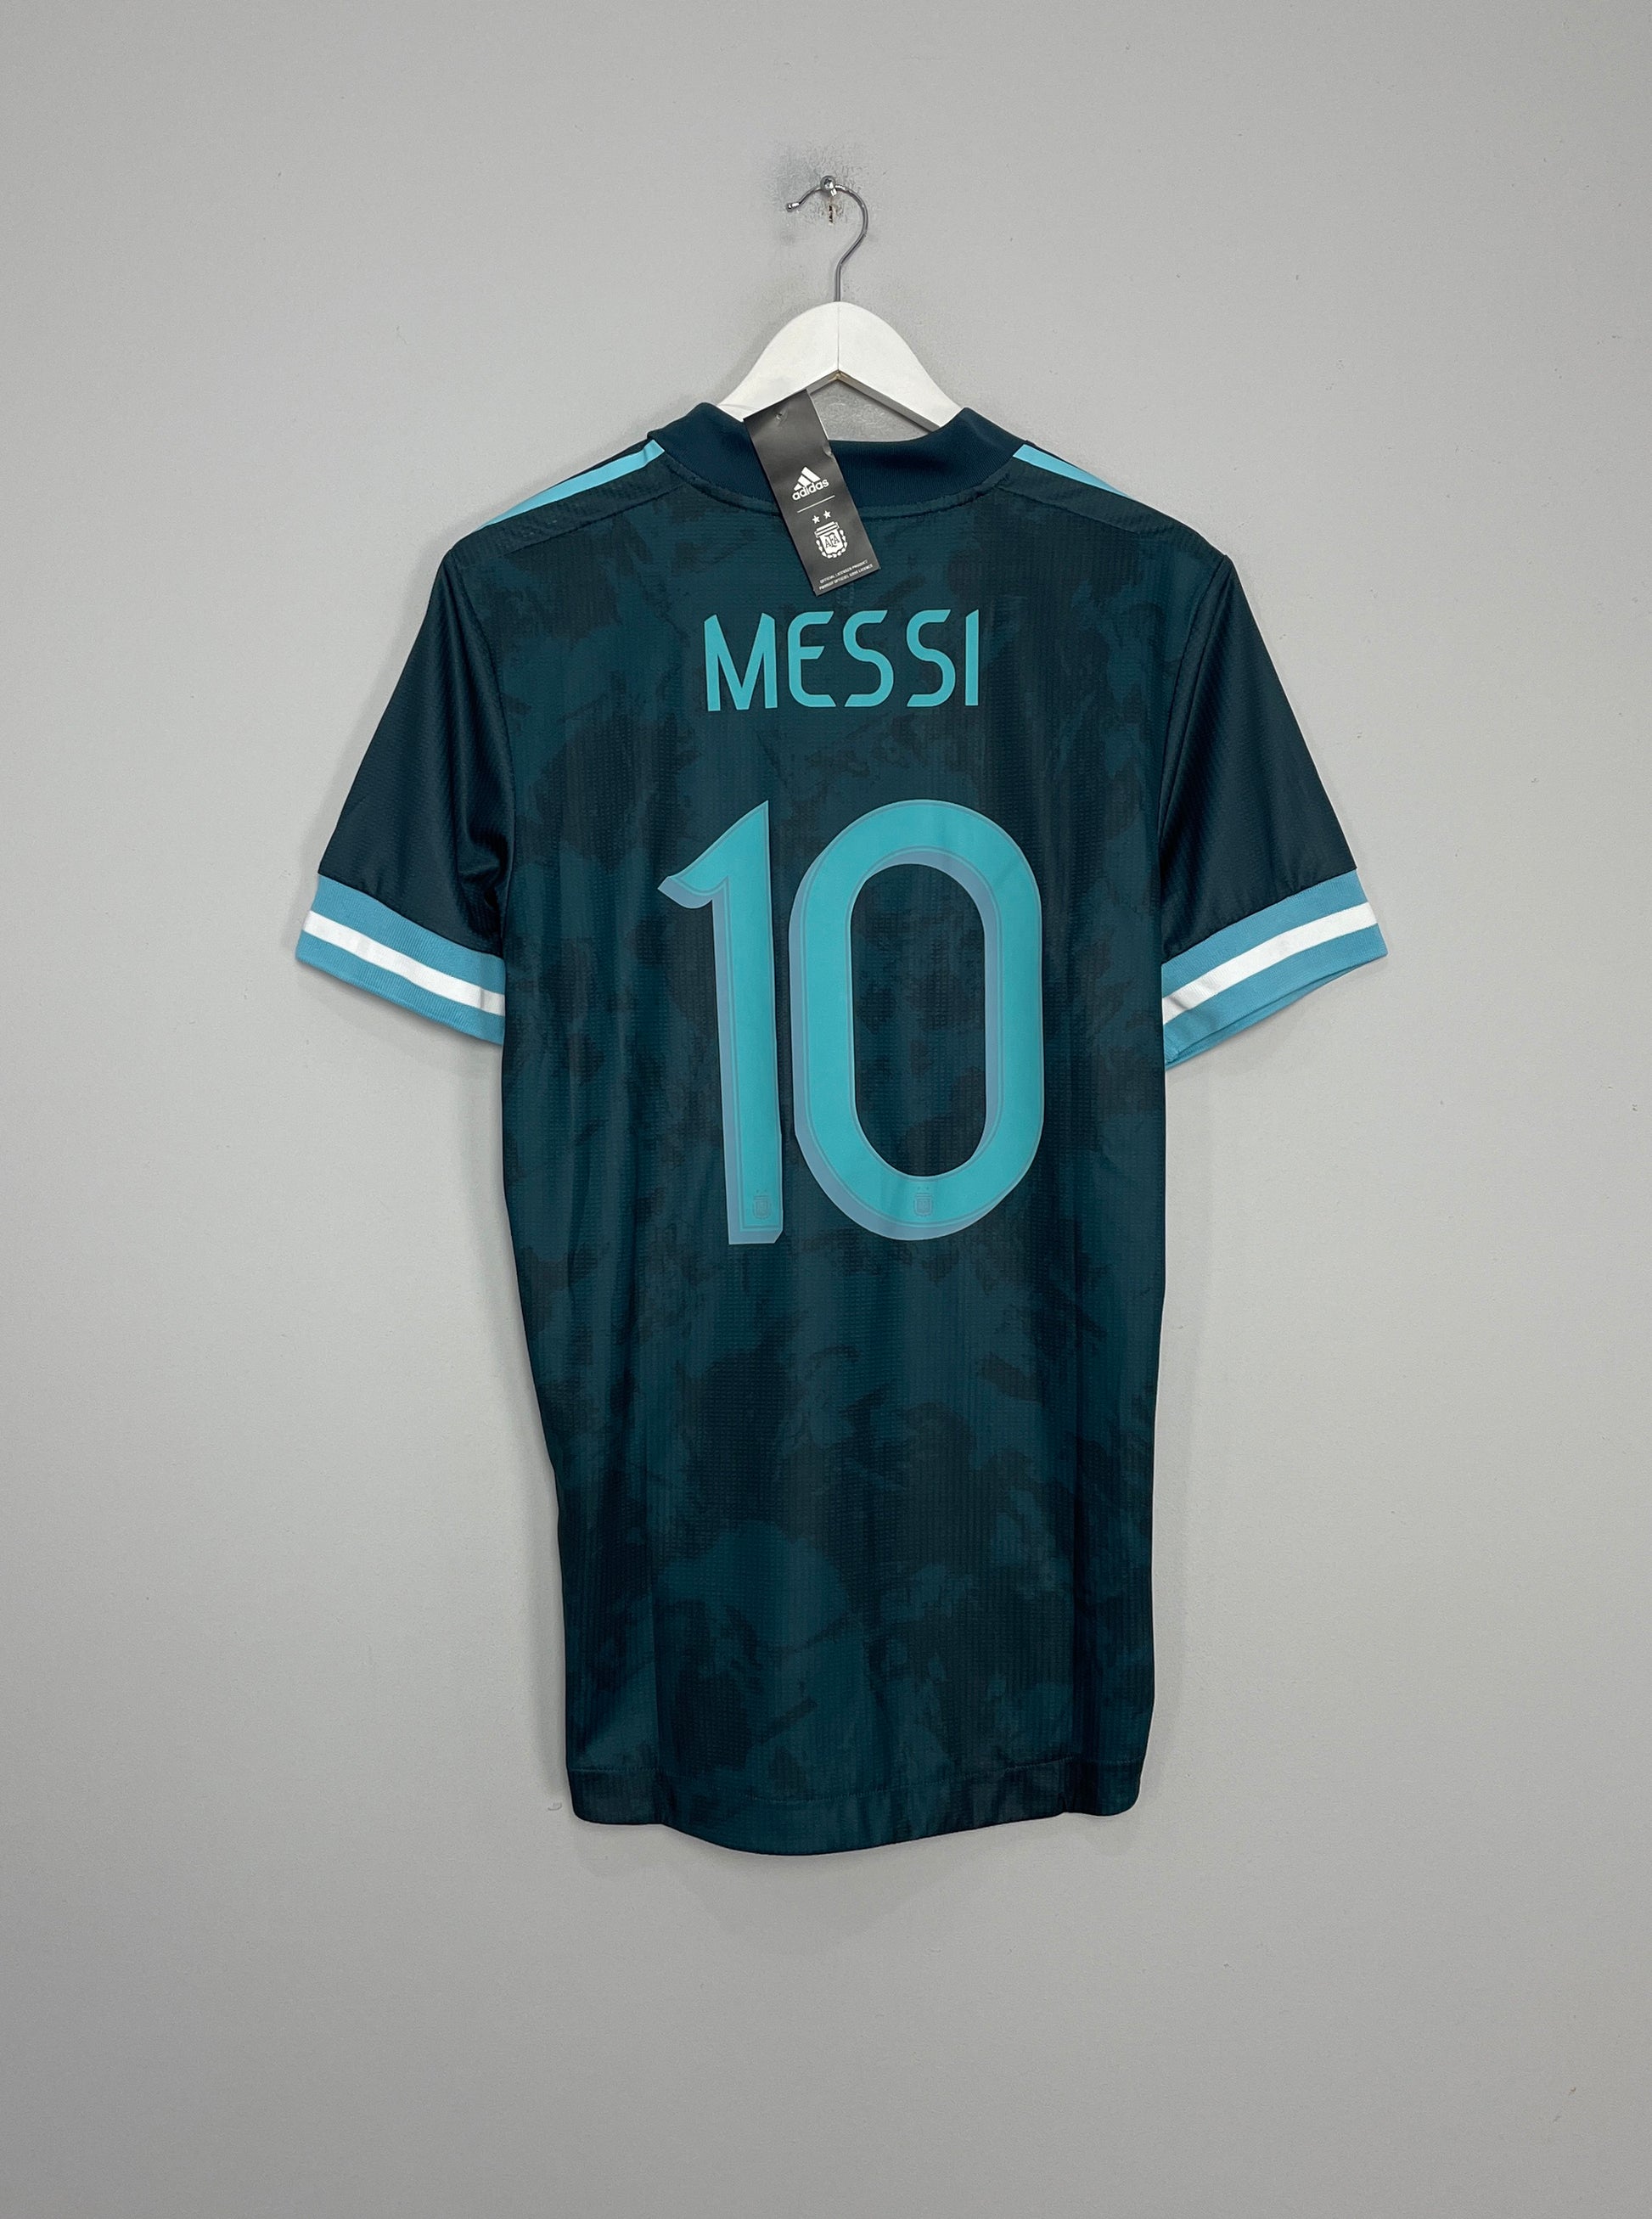 2020/22 ARGENTINA MESSI #10 *BNWT* PLAYER ISSUE AWAY SHIRT (S) ADIDAS